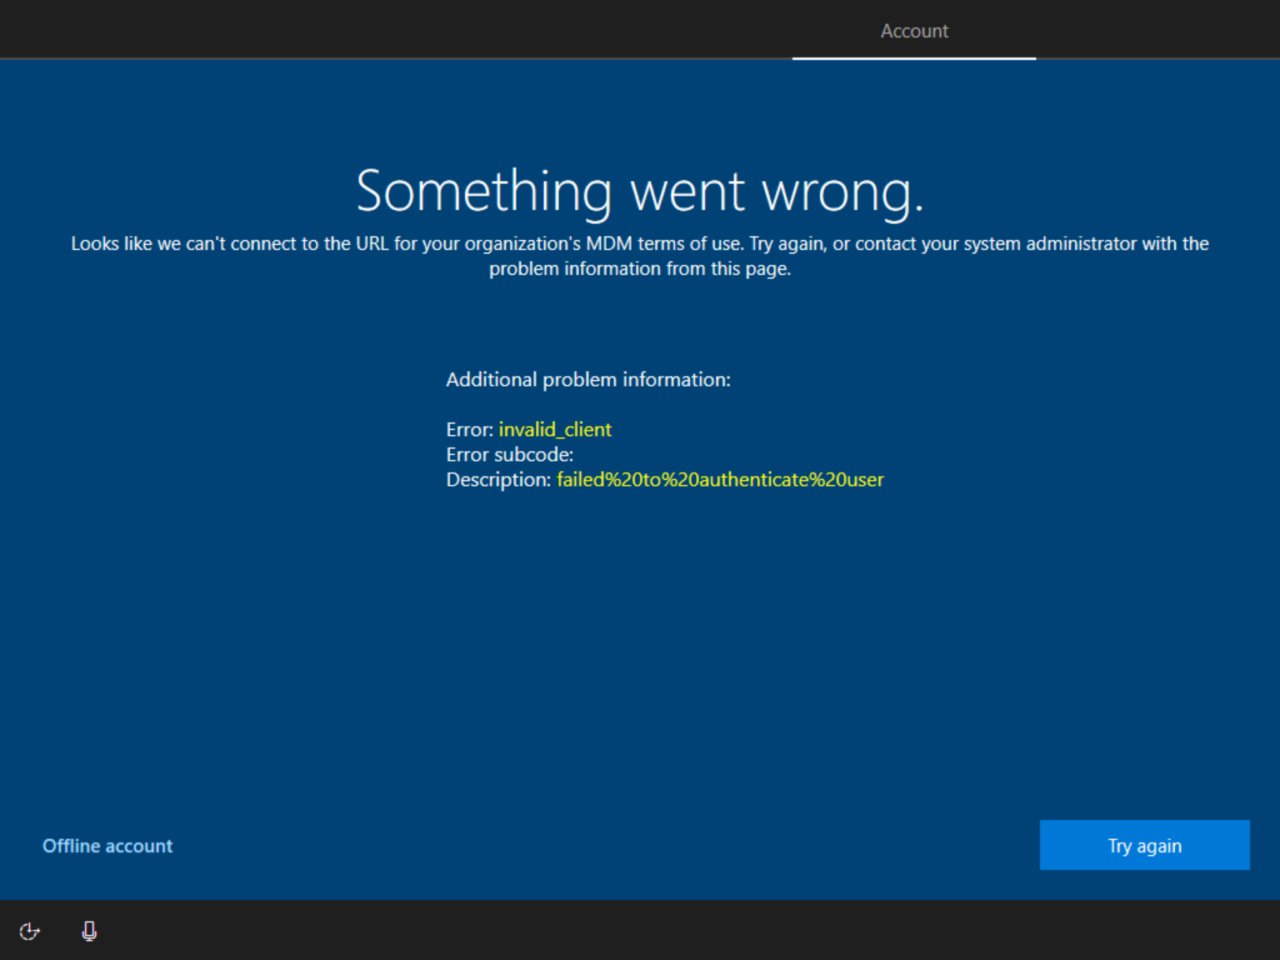 How to Solve Invalid_Client Error When Joining Windows 10 to Azure AD